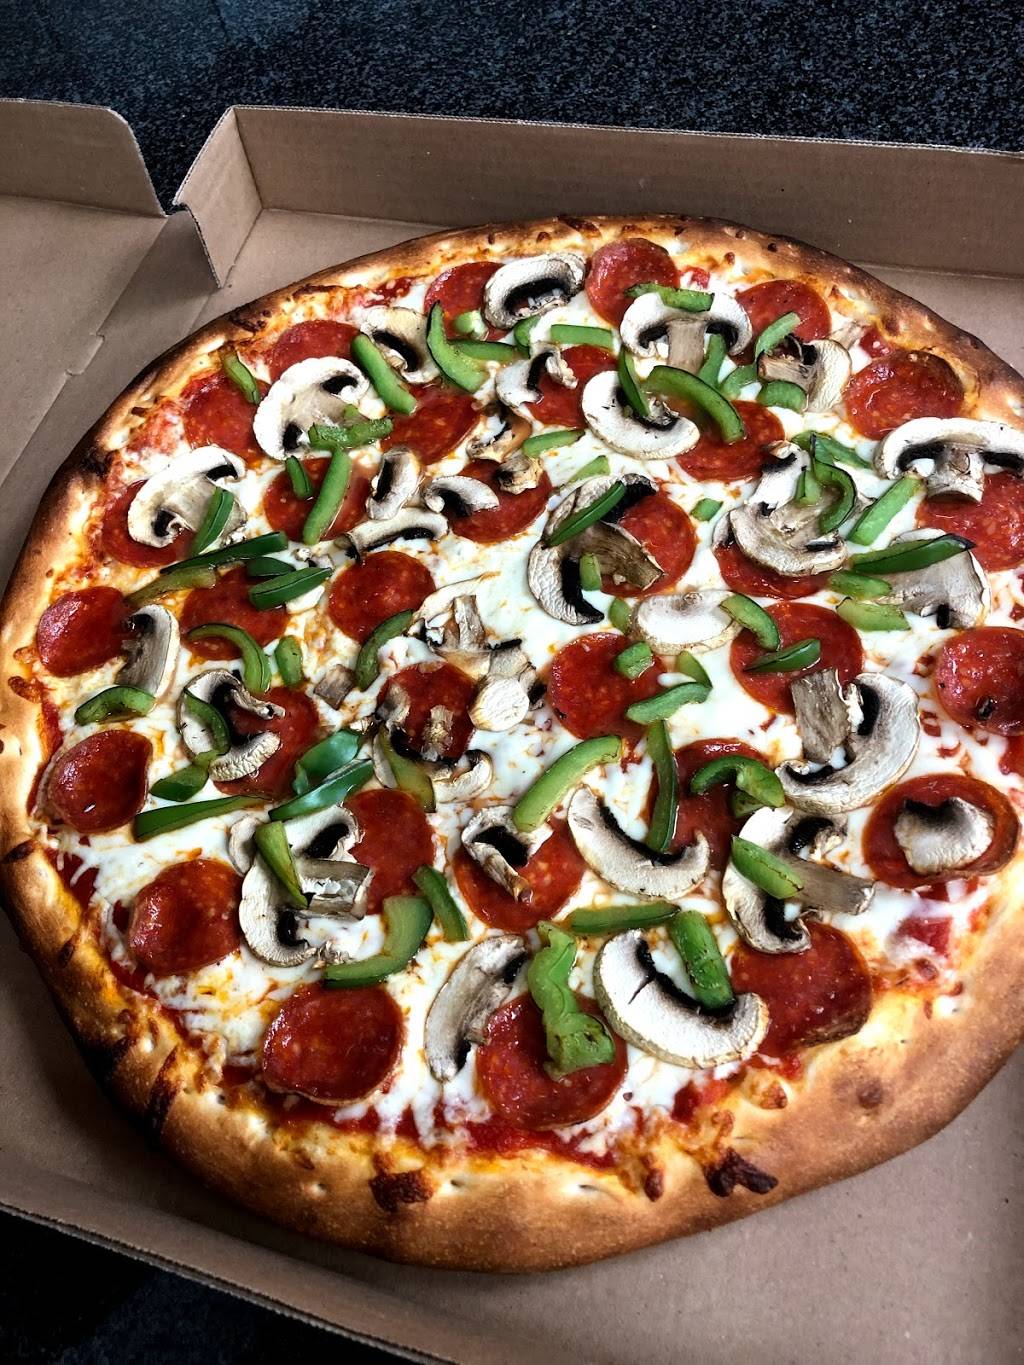 Firestone Pizza and Wings - Mountain | meal delivery | 536 Upper Wellington St, Hamilton, ON L9A 3P5, Canada | 9055751818 OR +1 905-575-1818